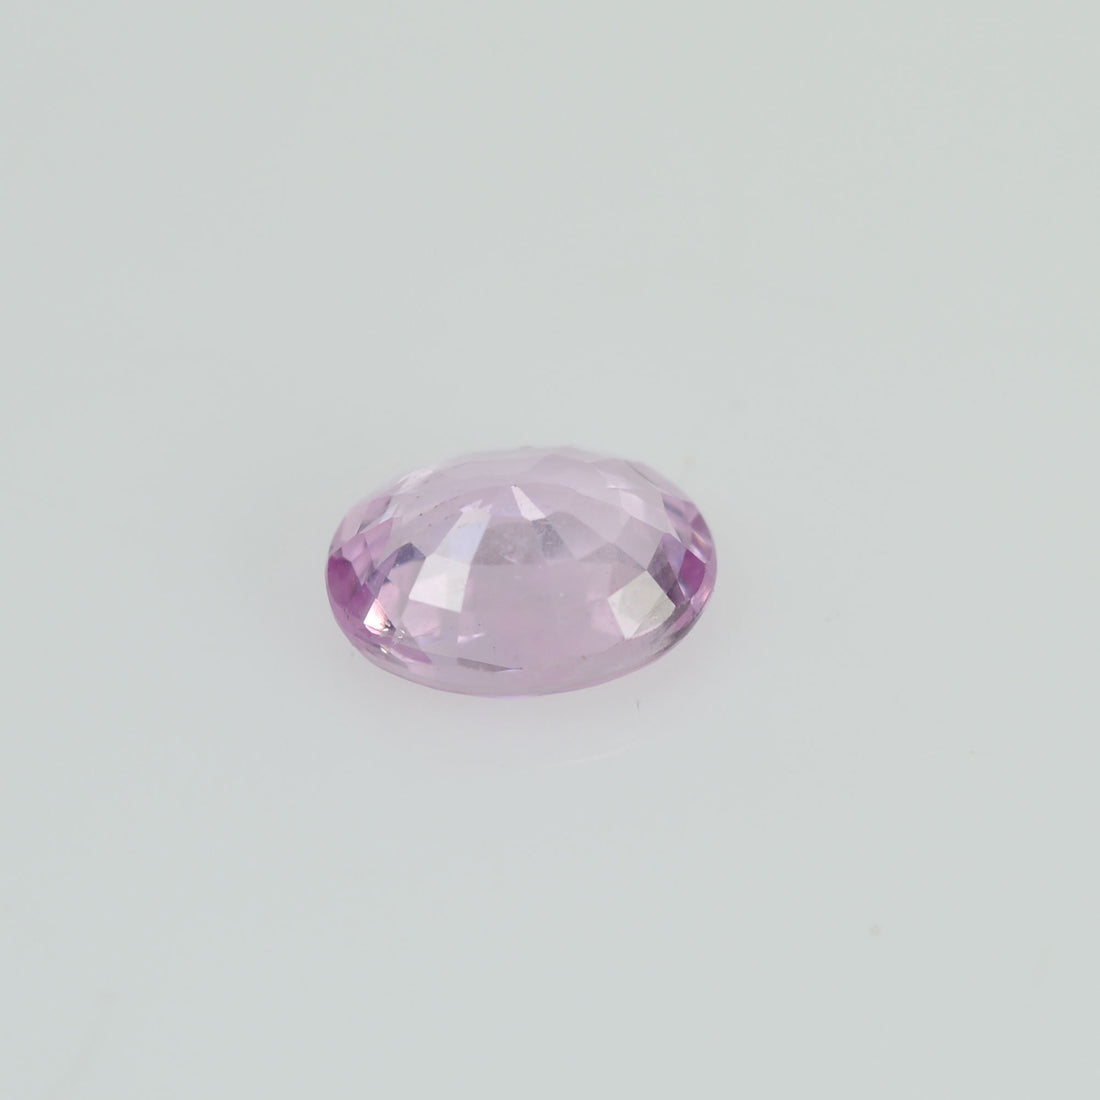 0.39 cts Natural  Pink Sapphire Loose Gemstone oval Cut